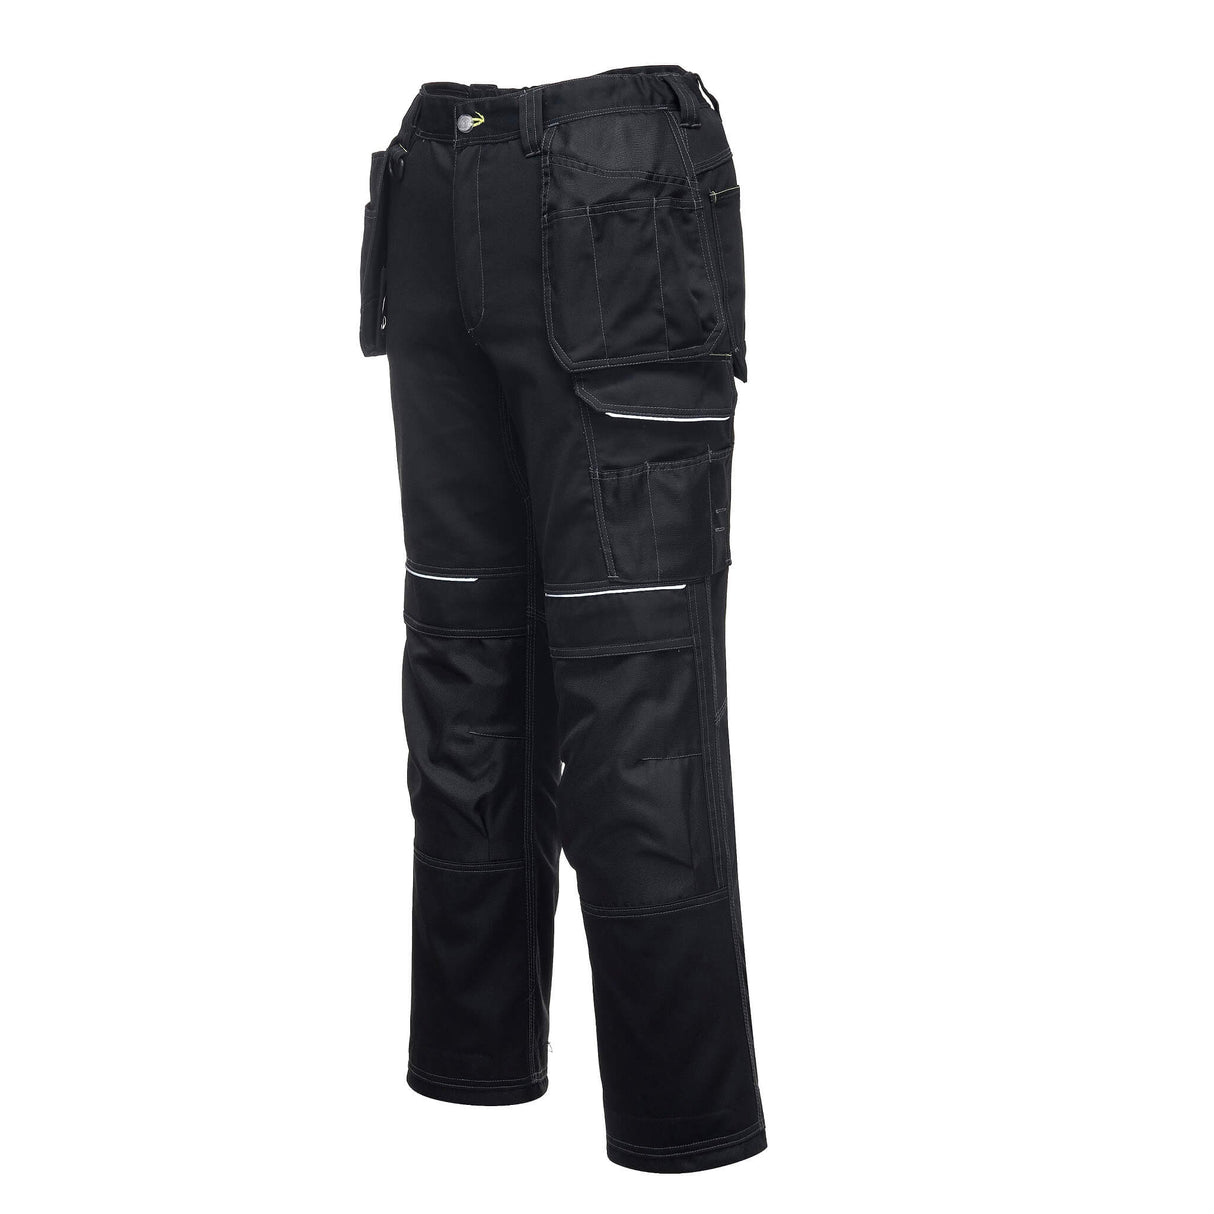 T602 - PW3 Holster Work Trousers